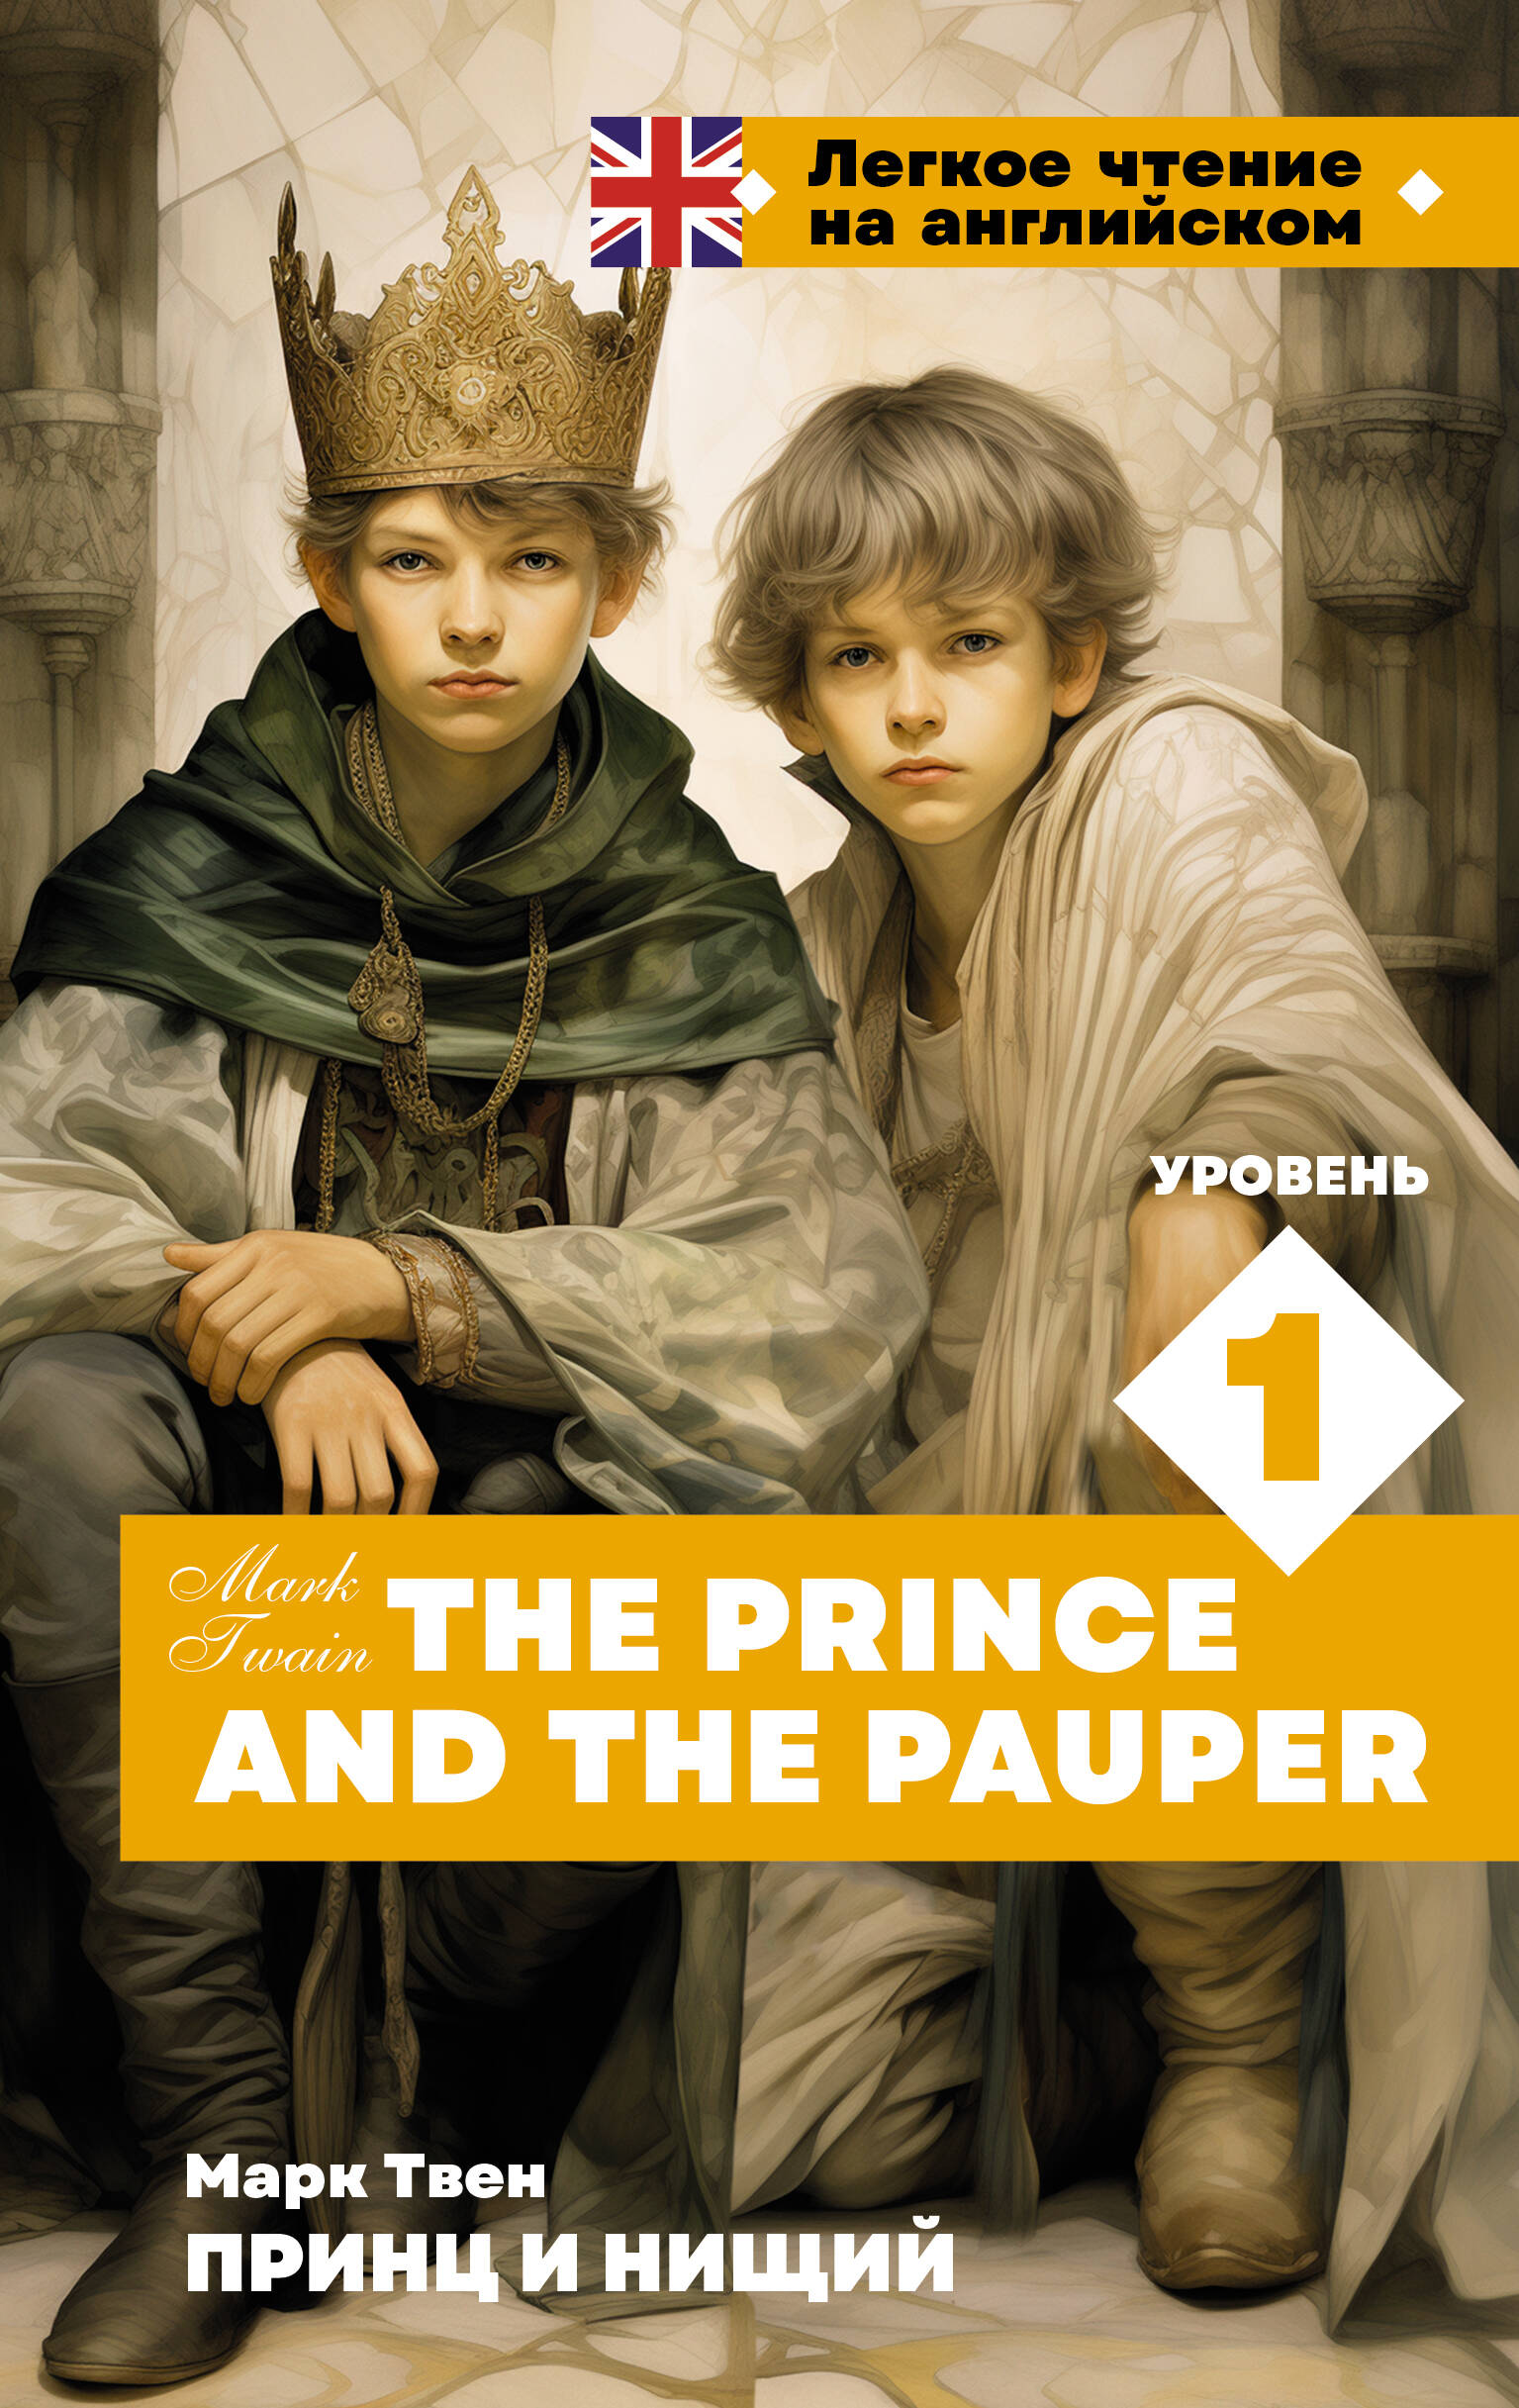   .  1 = The Prince and the Pauper